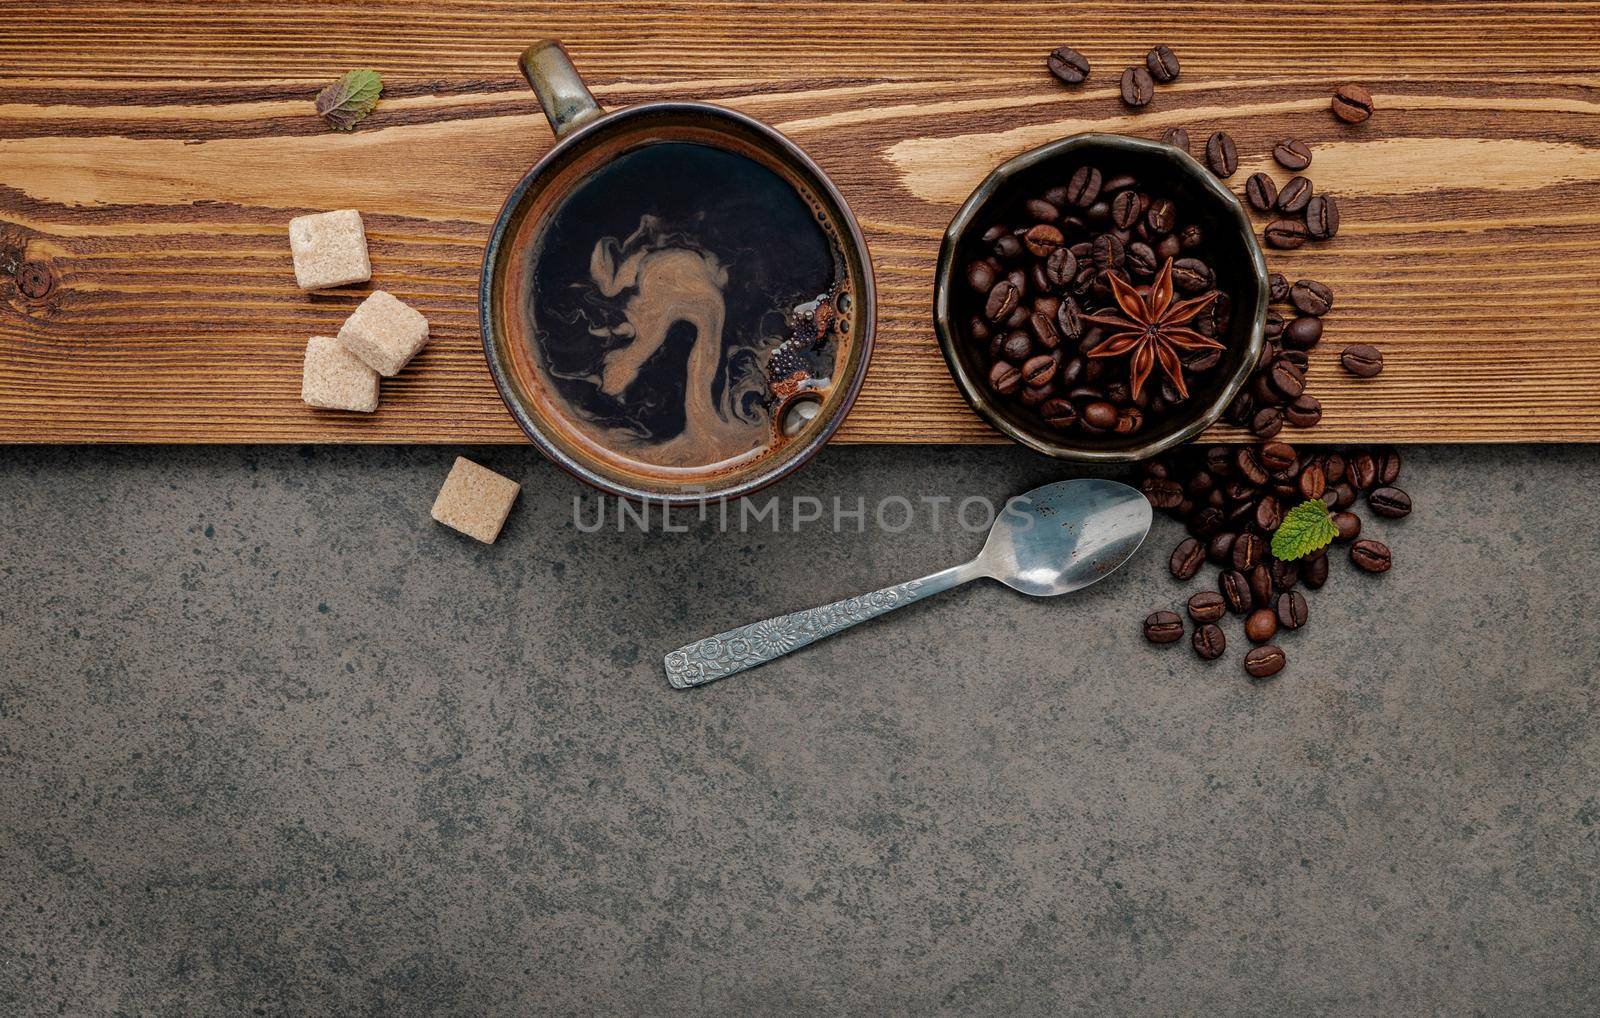 Roasted coffee beans with coffee cup setup on dark stone background. by kerdkanno